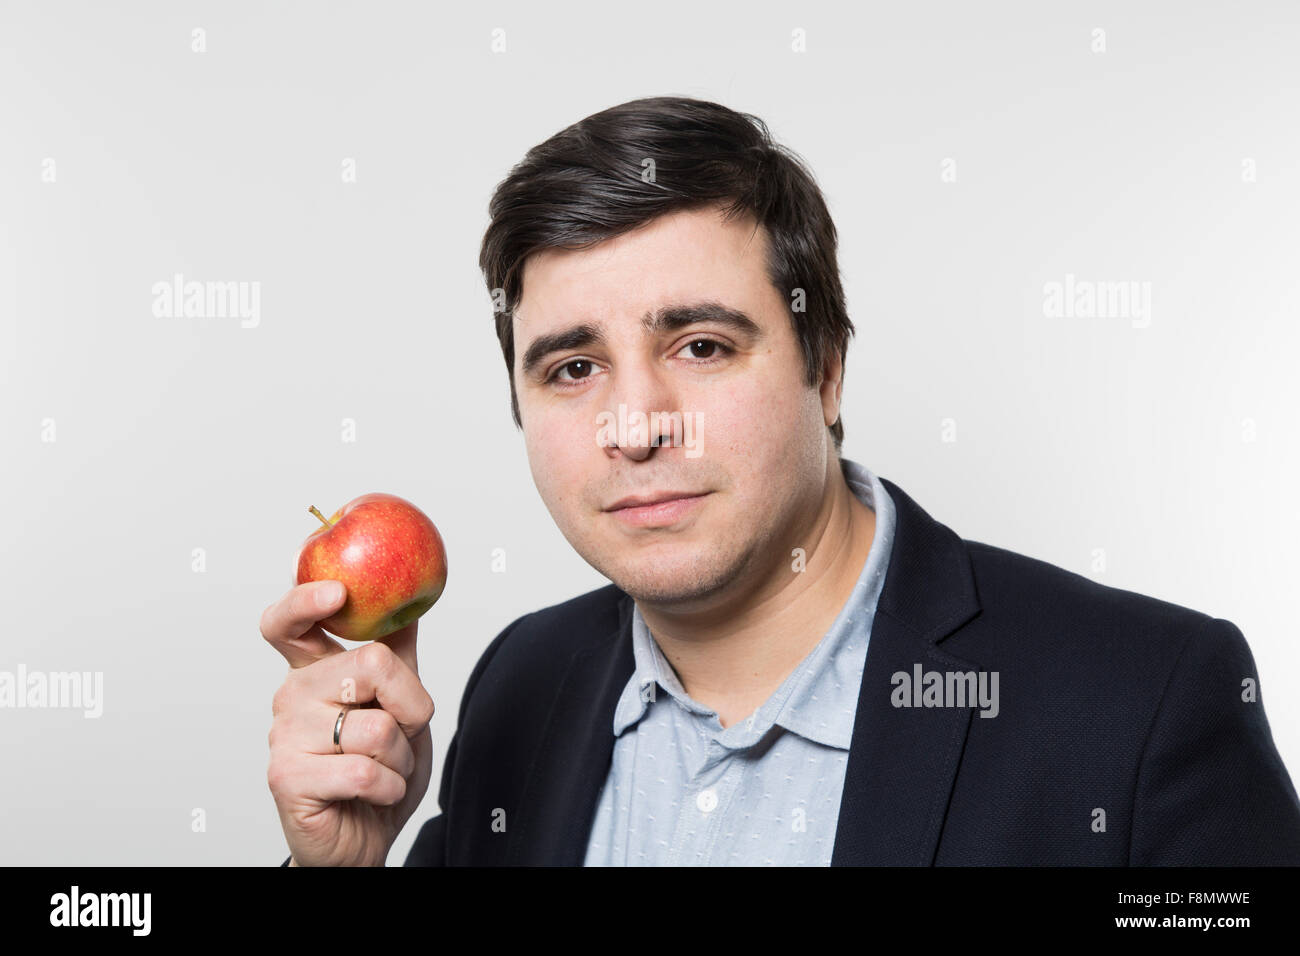 Dark-haired european businesmann with a trusting look hold an small apple while in front of a gradient background Stock Photo